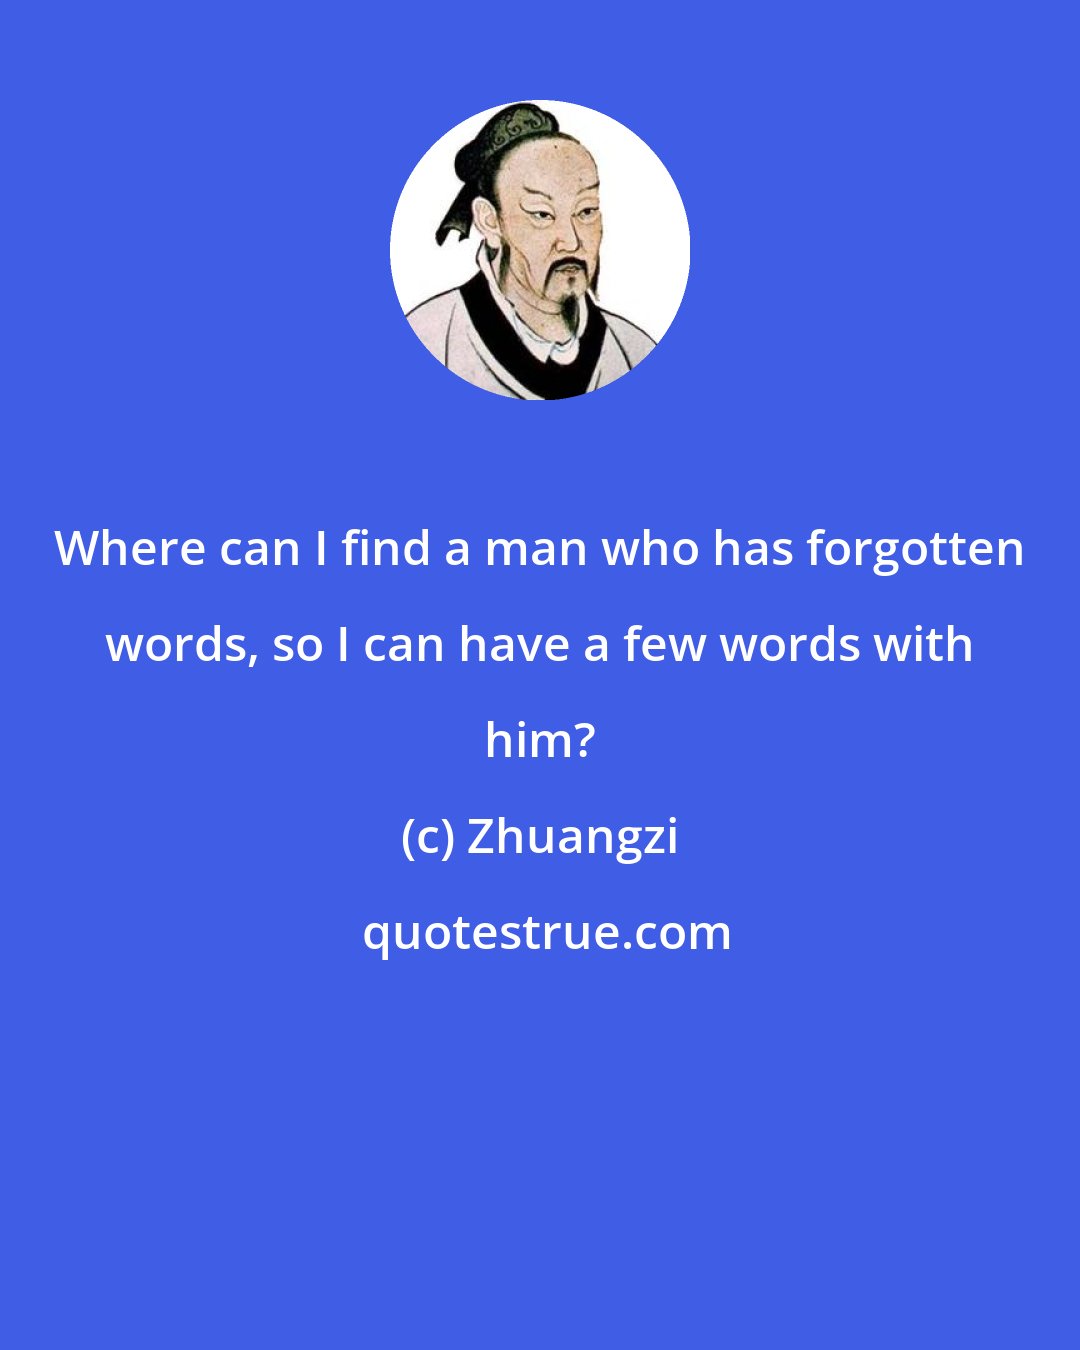 Zhuangzi: Where can I find a man who has forgotten words, so I can have a few words with him?